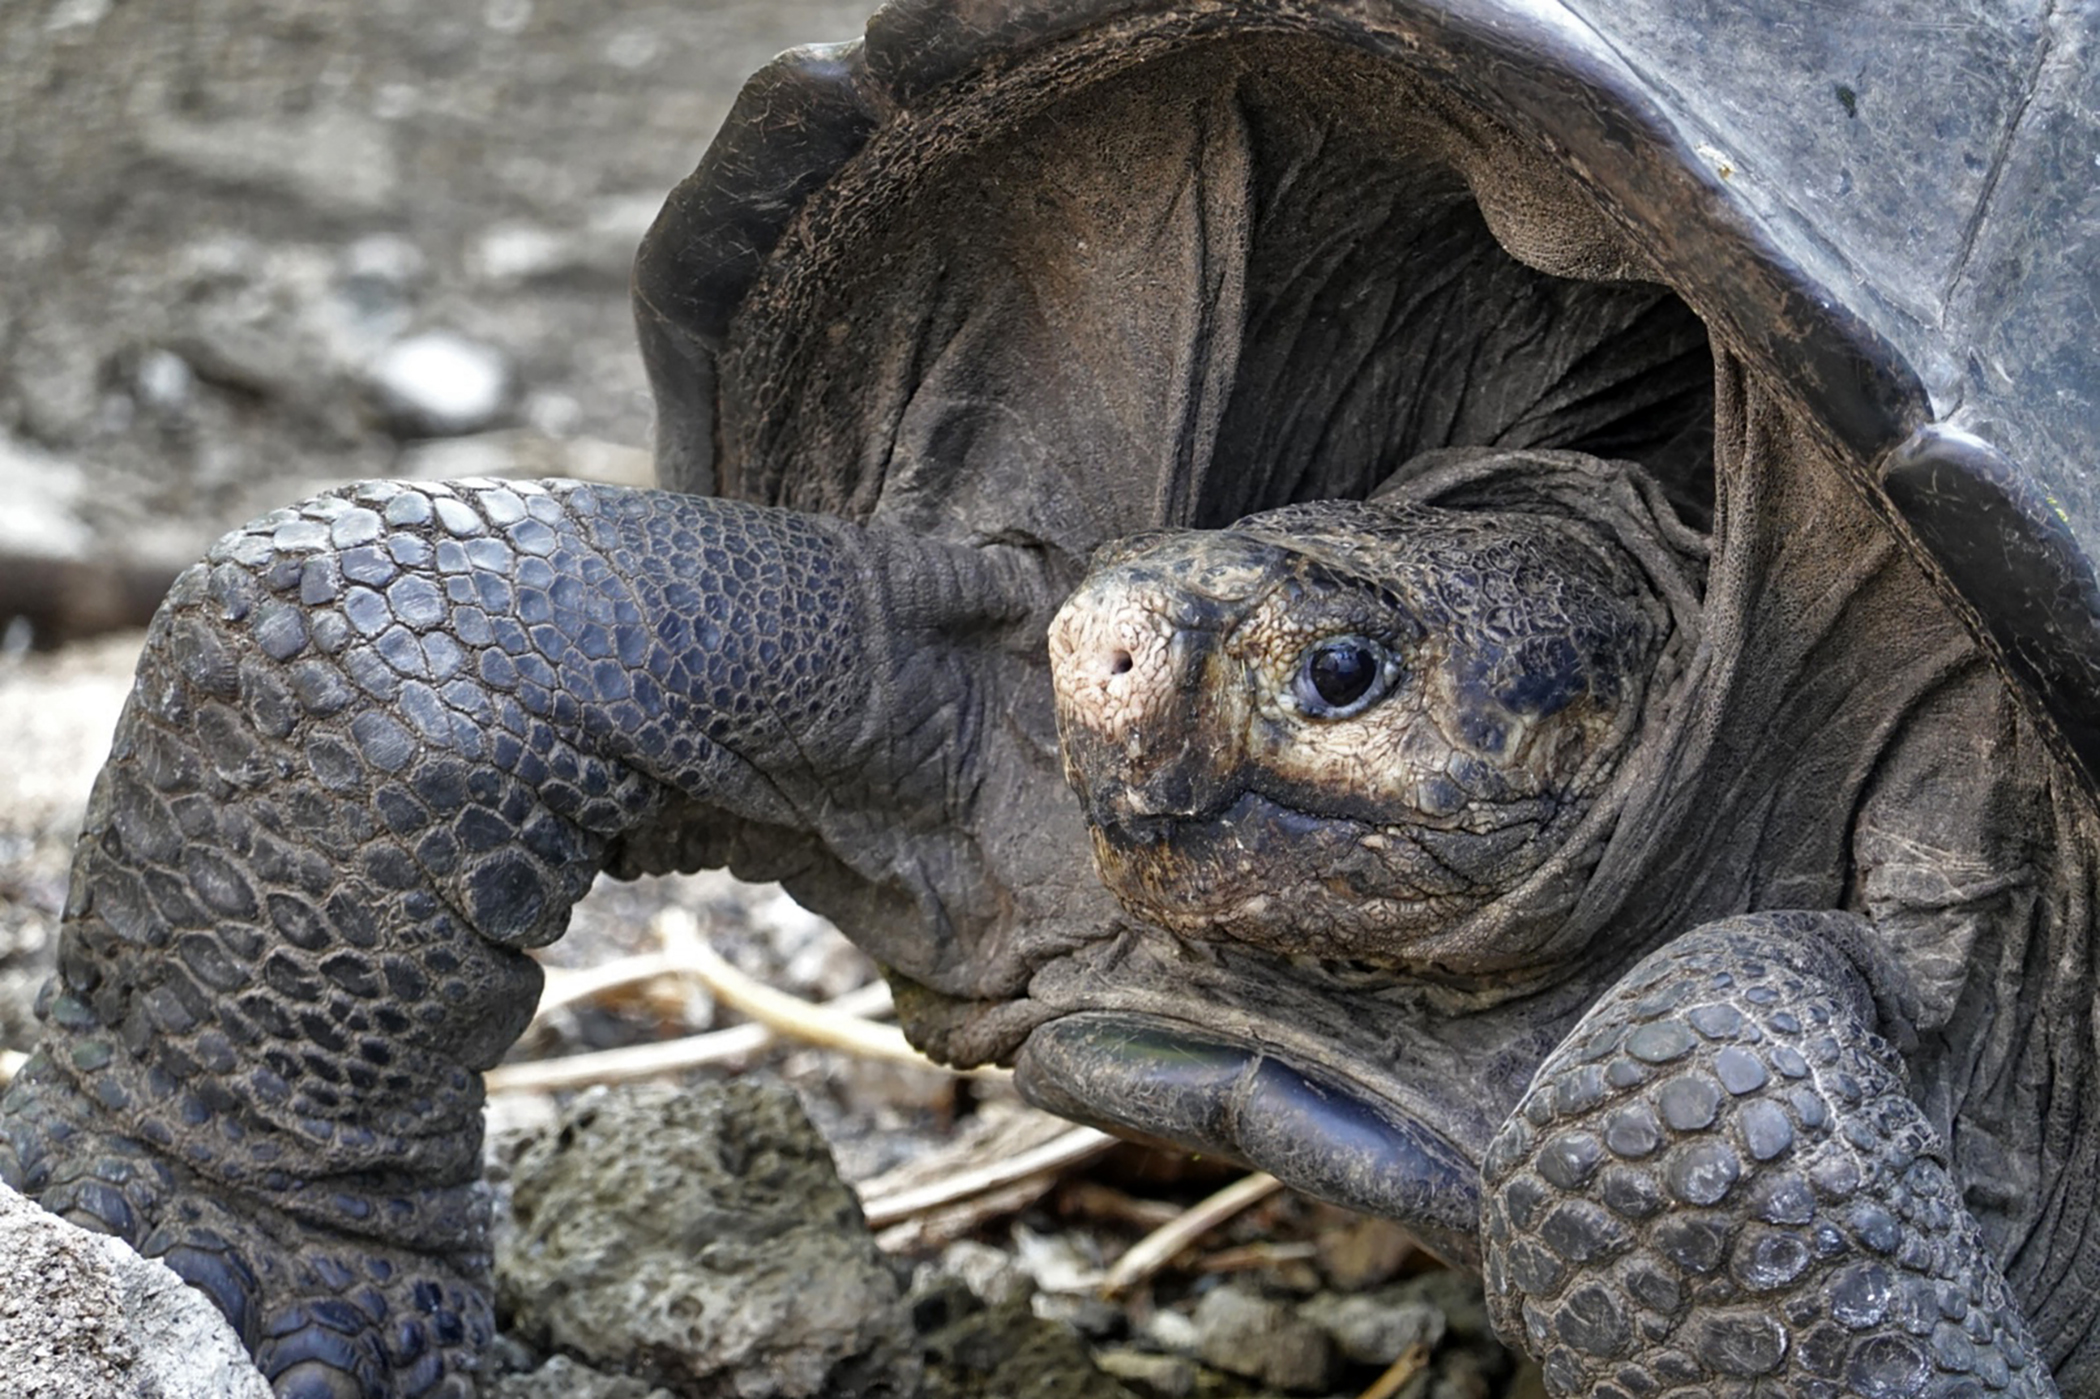 PHOTO: A specimen of the giant Galapagos tortoise Chelonoidis phantasticus, thought to have gone extinct about a century ago, is seen at the Galapagos National Park on Santa Cruz Island in the Galapagos Archipelago, Feb. 19, 2019.